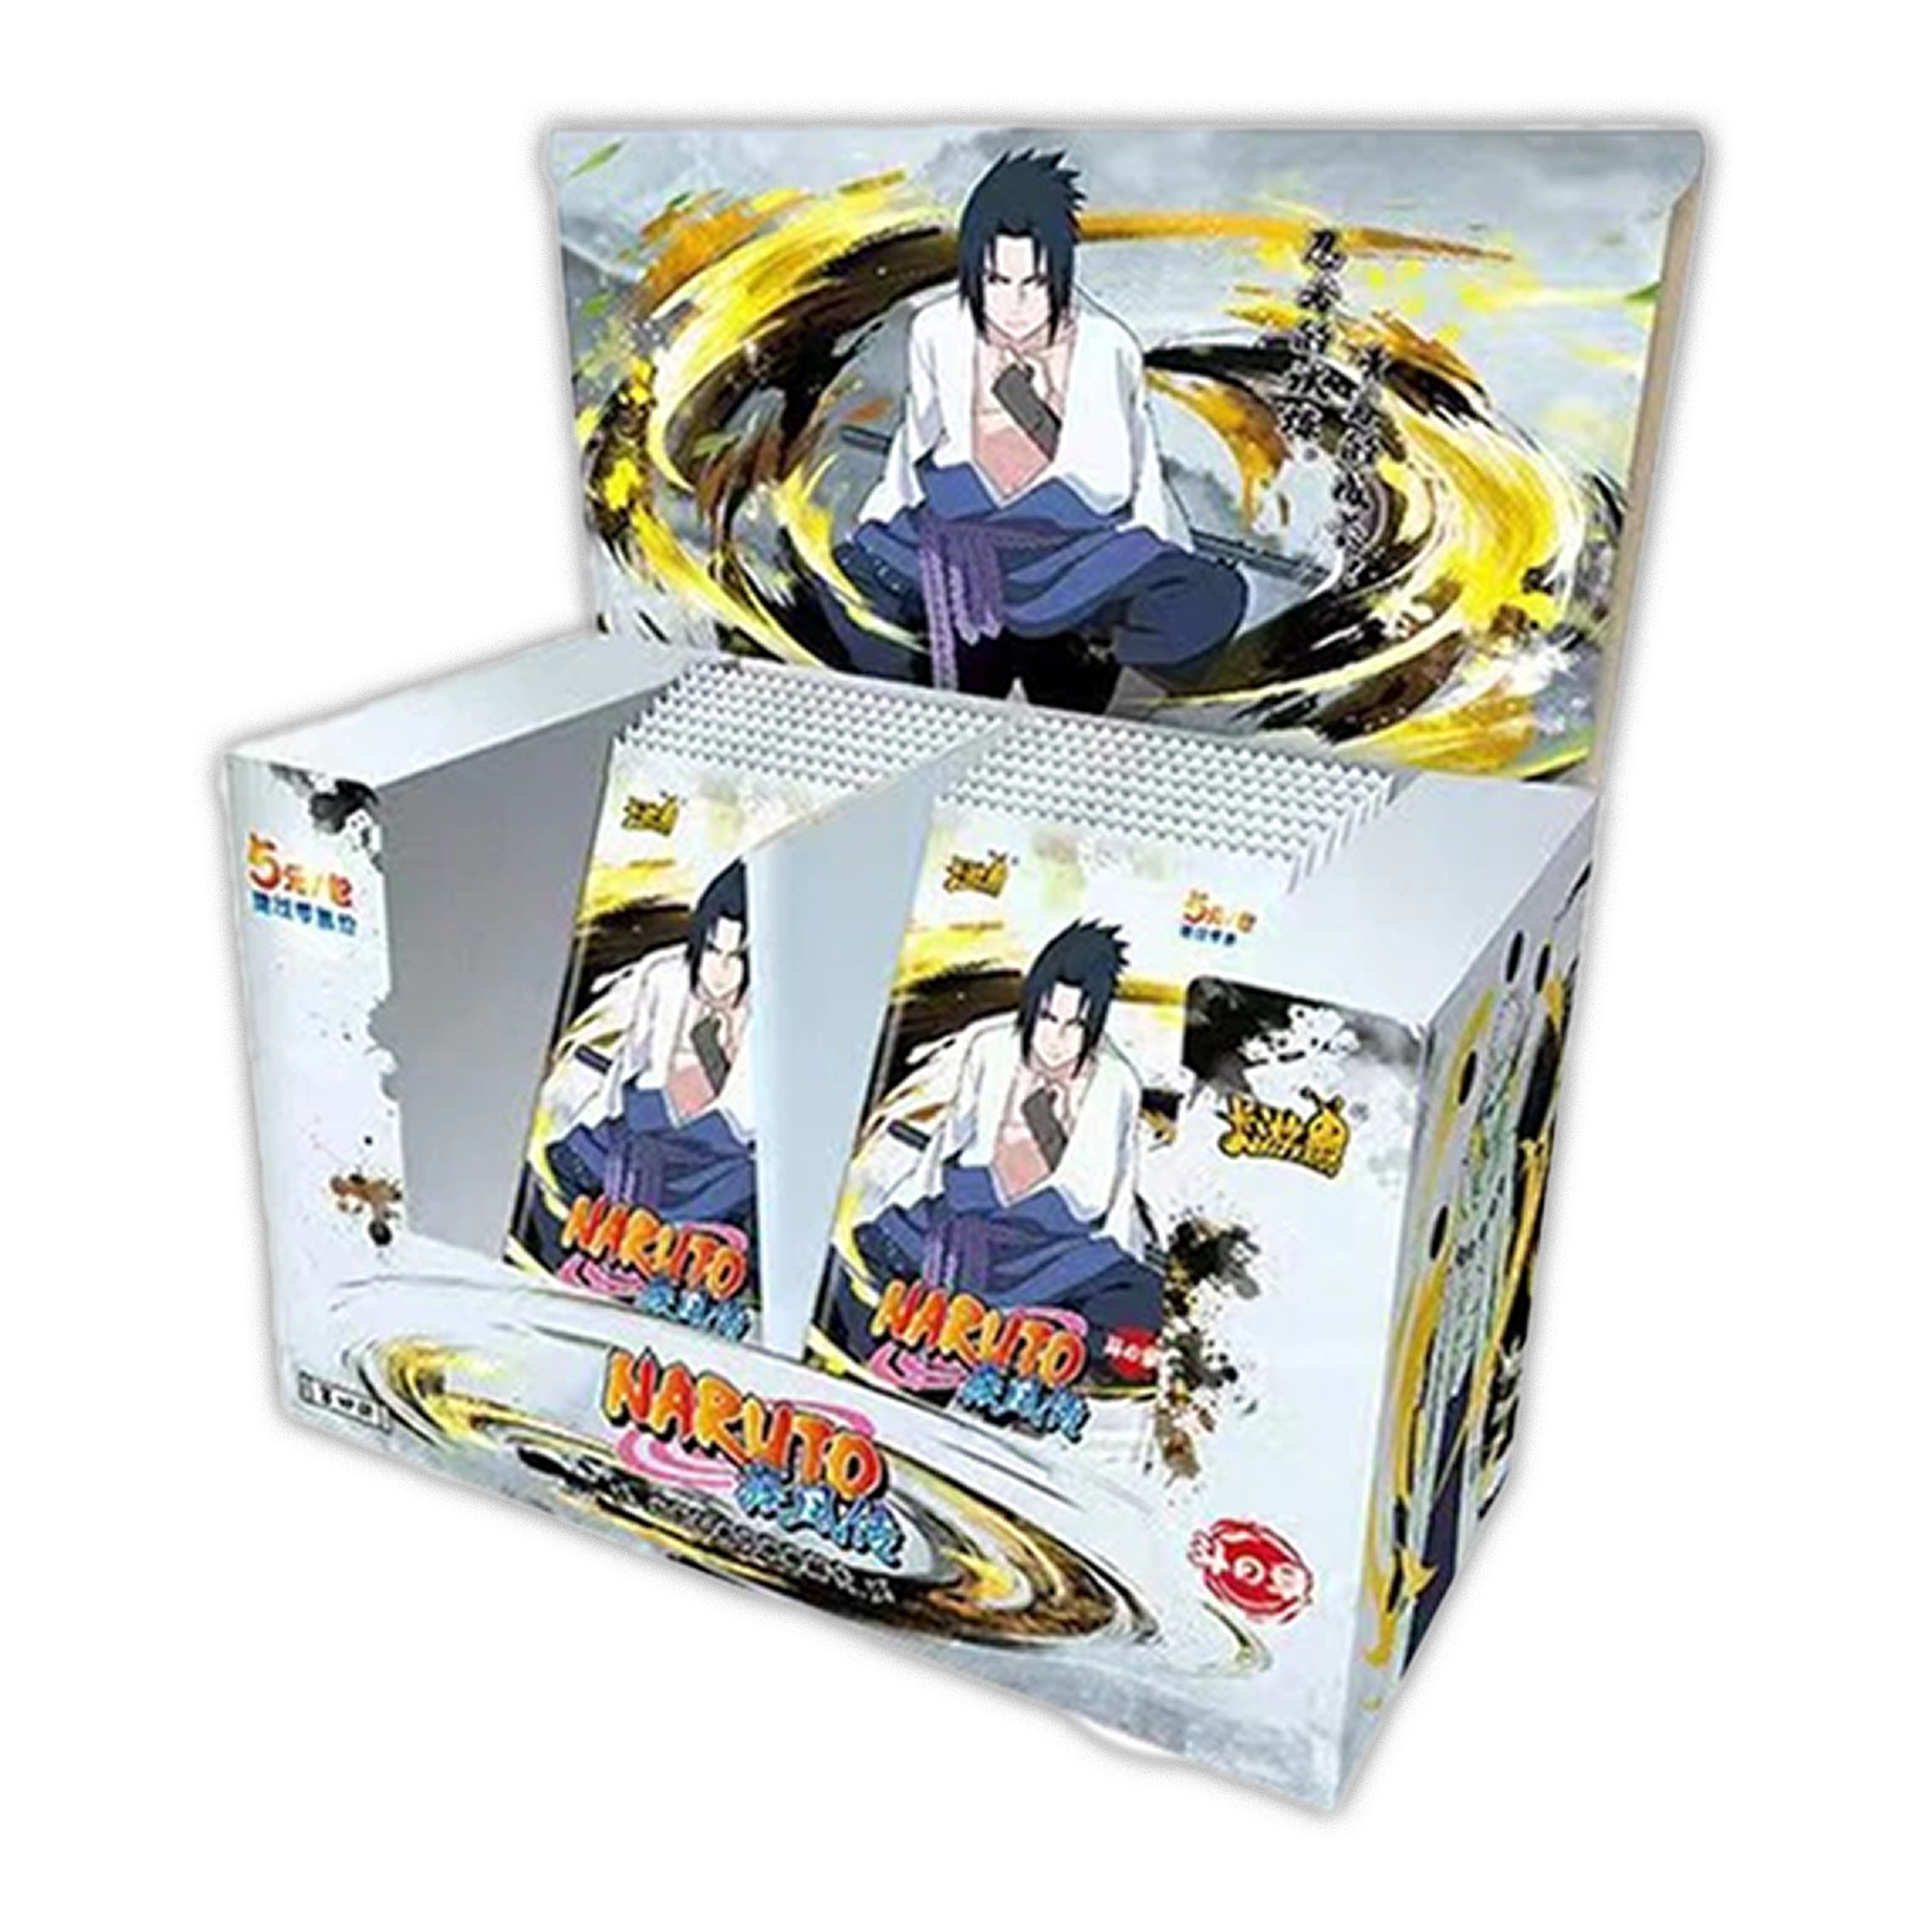 SCELLE] Display 20 Boosters Naruto Kayou - Wave 4 Tiers 3 [CN]